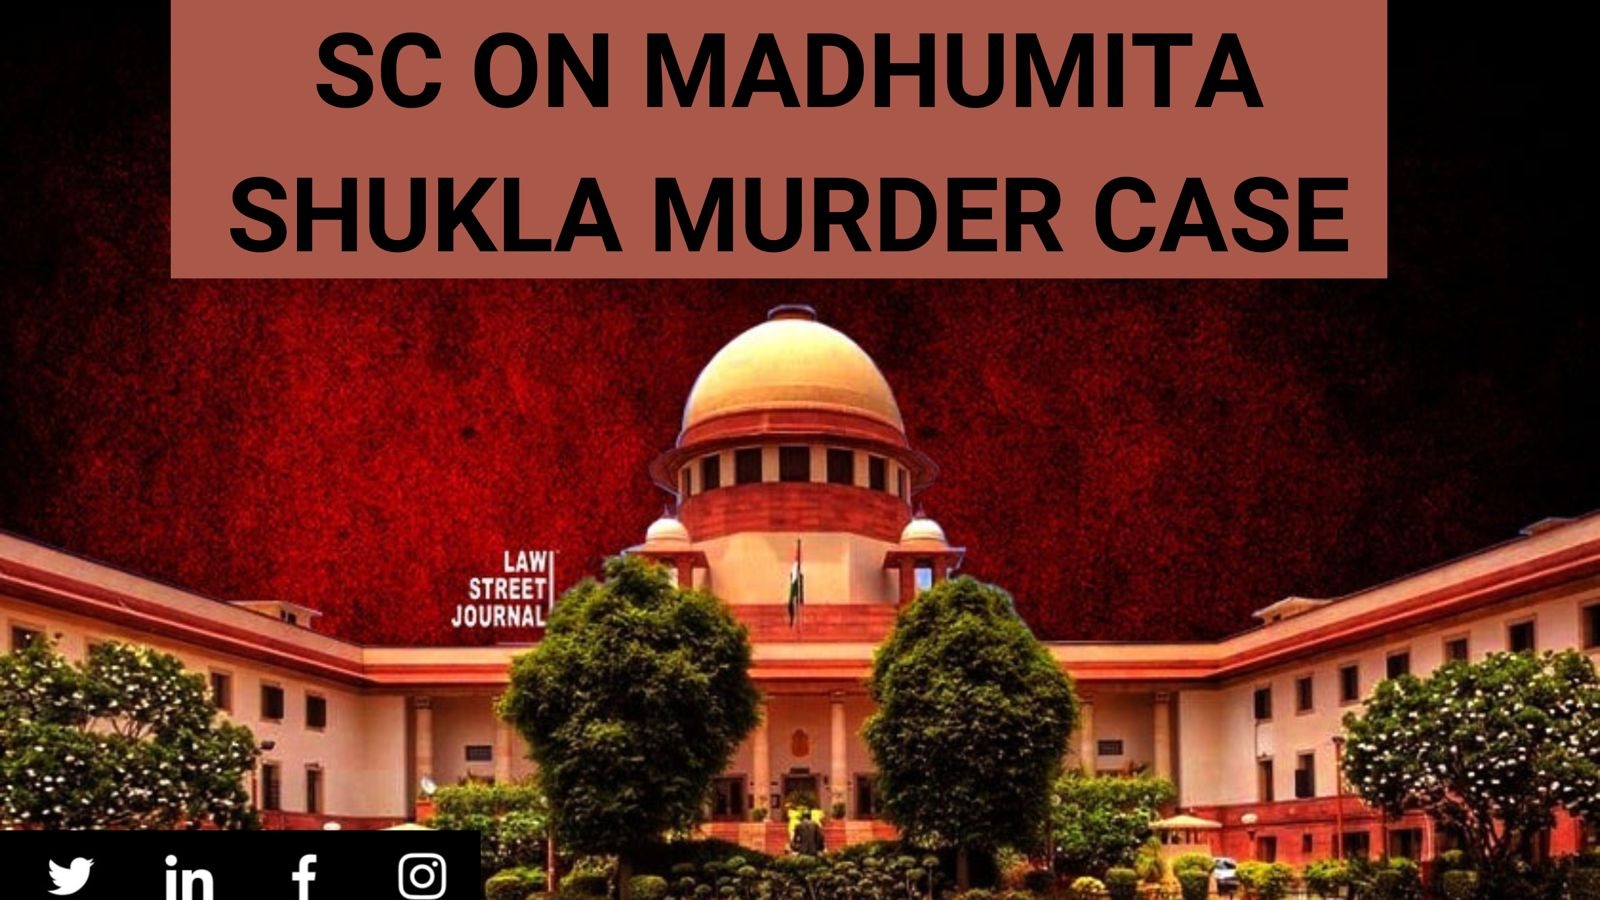 UP not Uttarakhand to decide remission plea SC on plea by convict in murder of poetess Madhumita Shukla Read Order